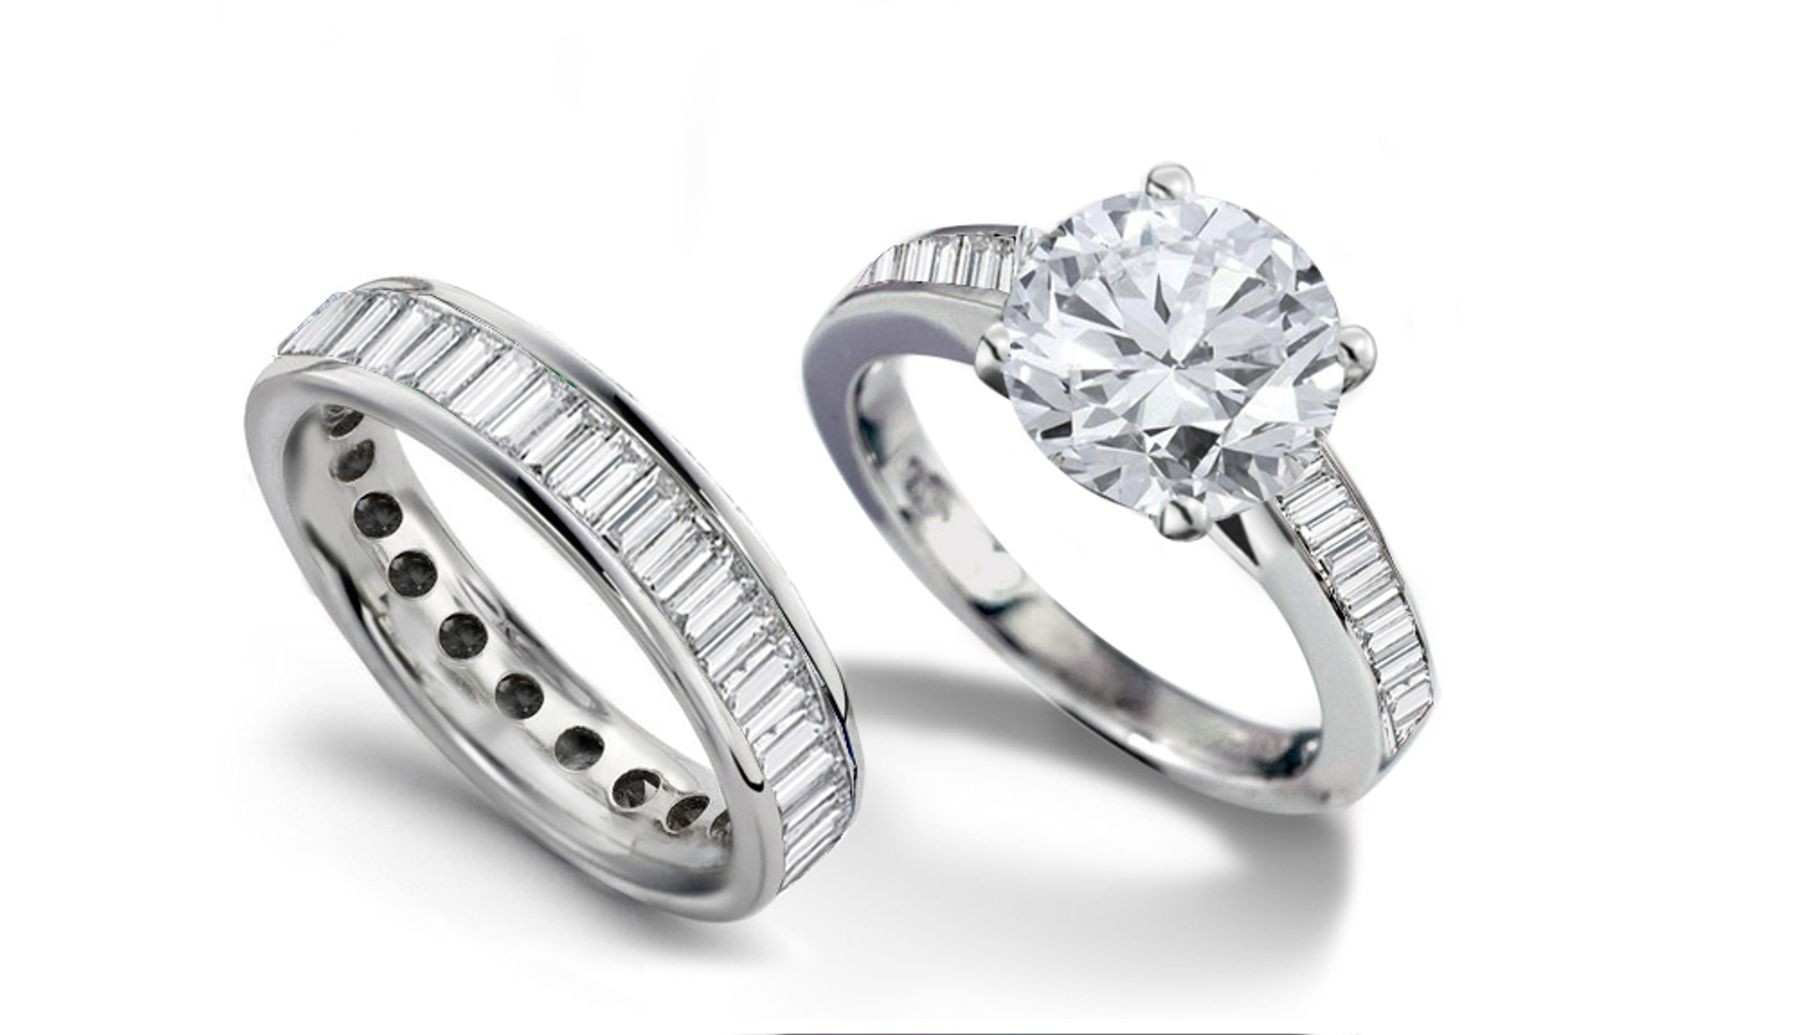 Brilliant Cut Round Diamond and Baguette Diamond Engagement Ring & Matching Wedding Band in Platinum